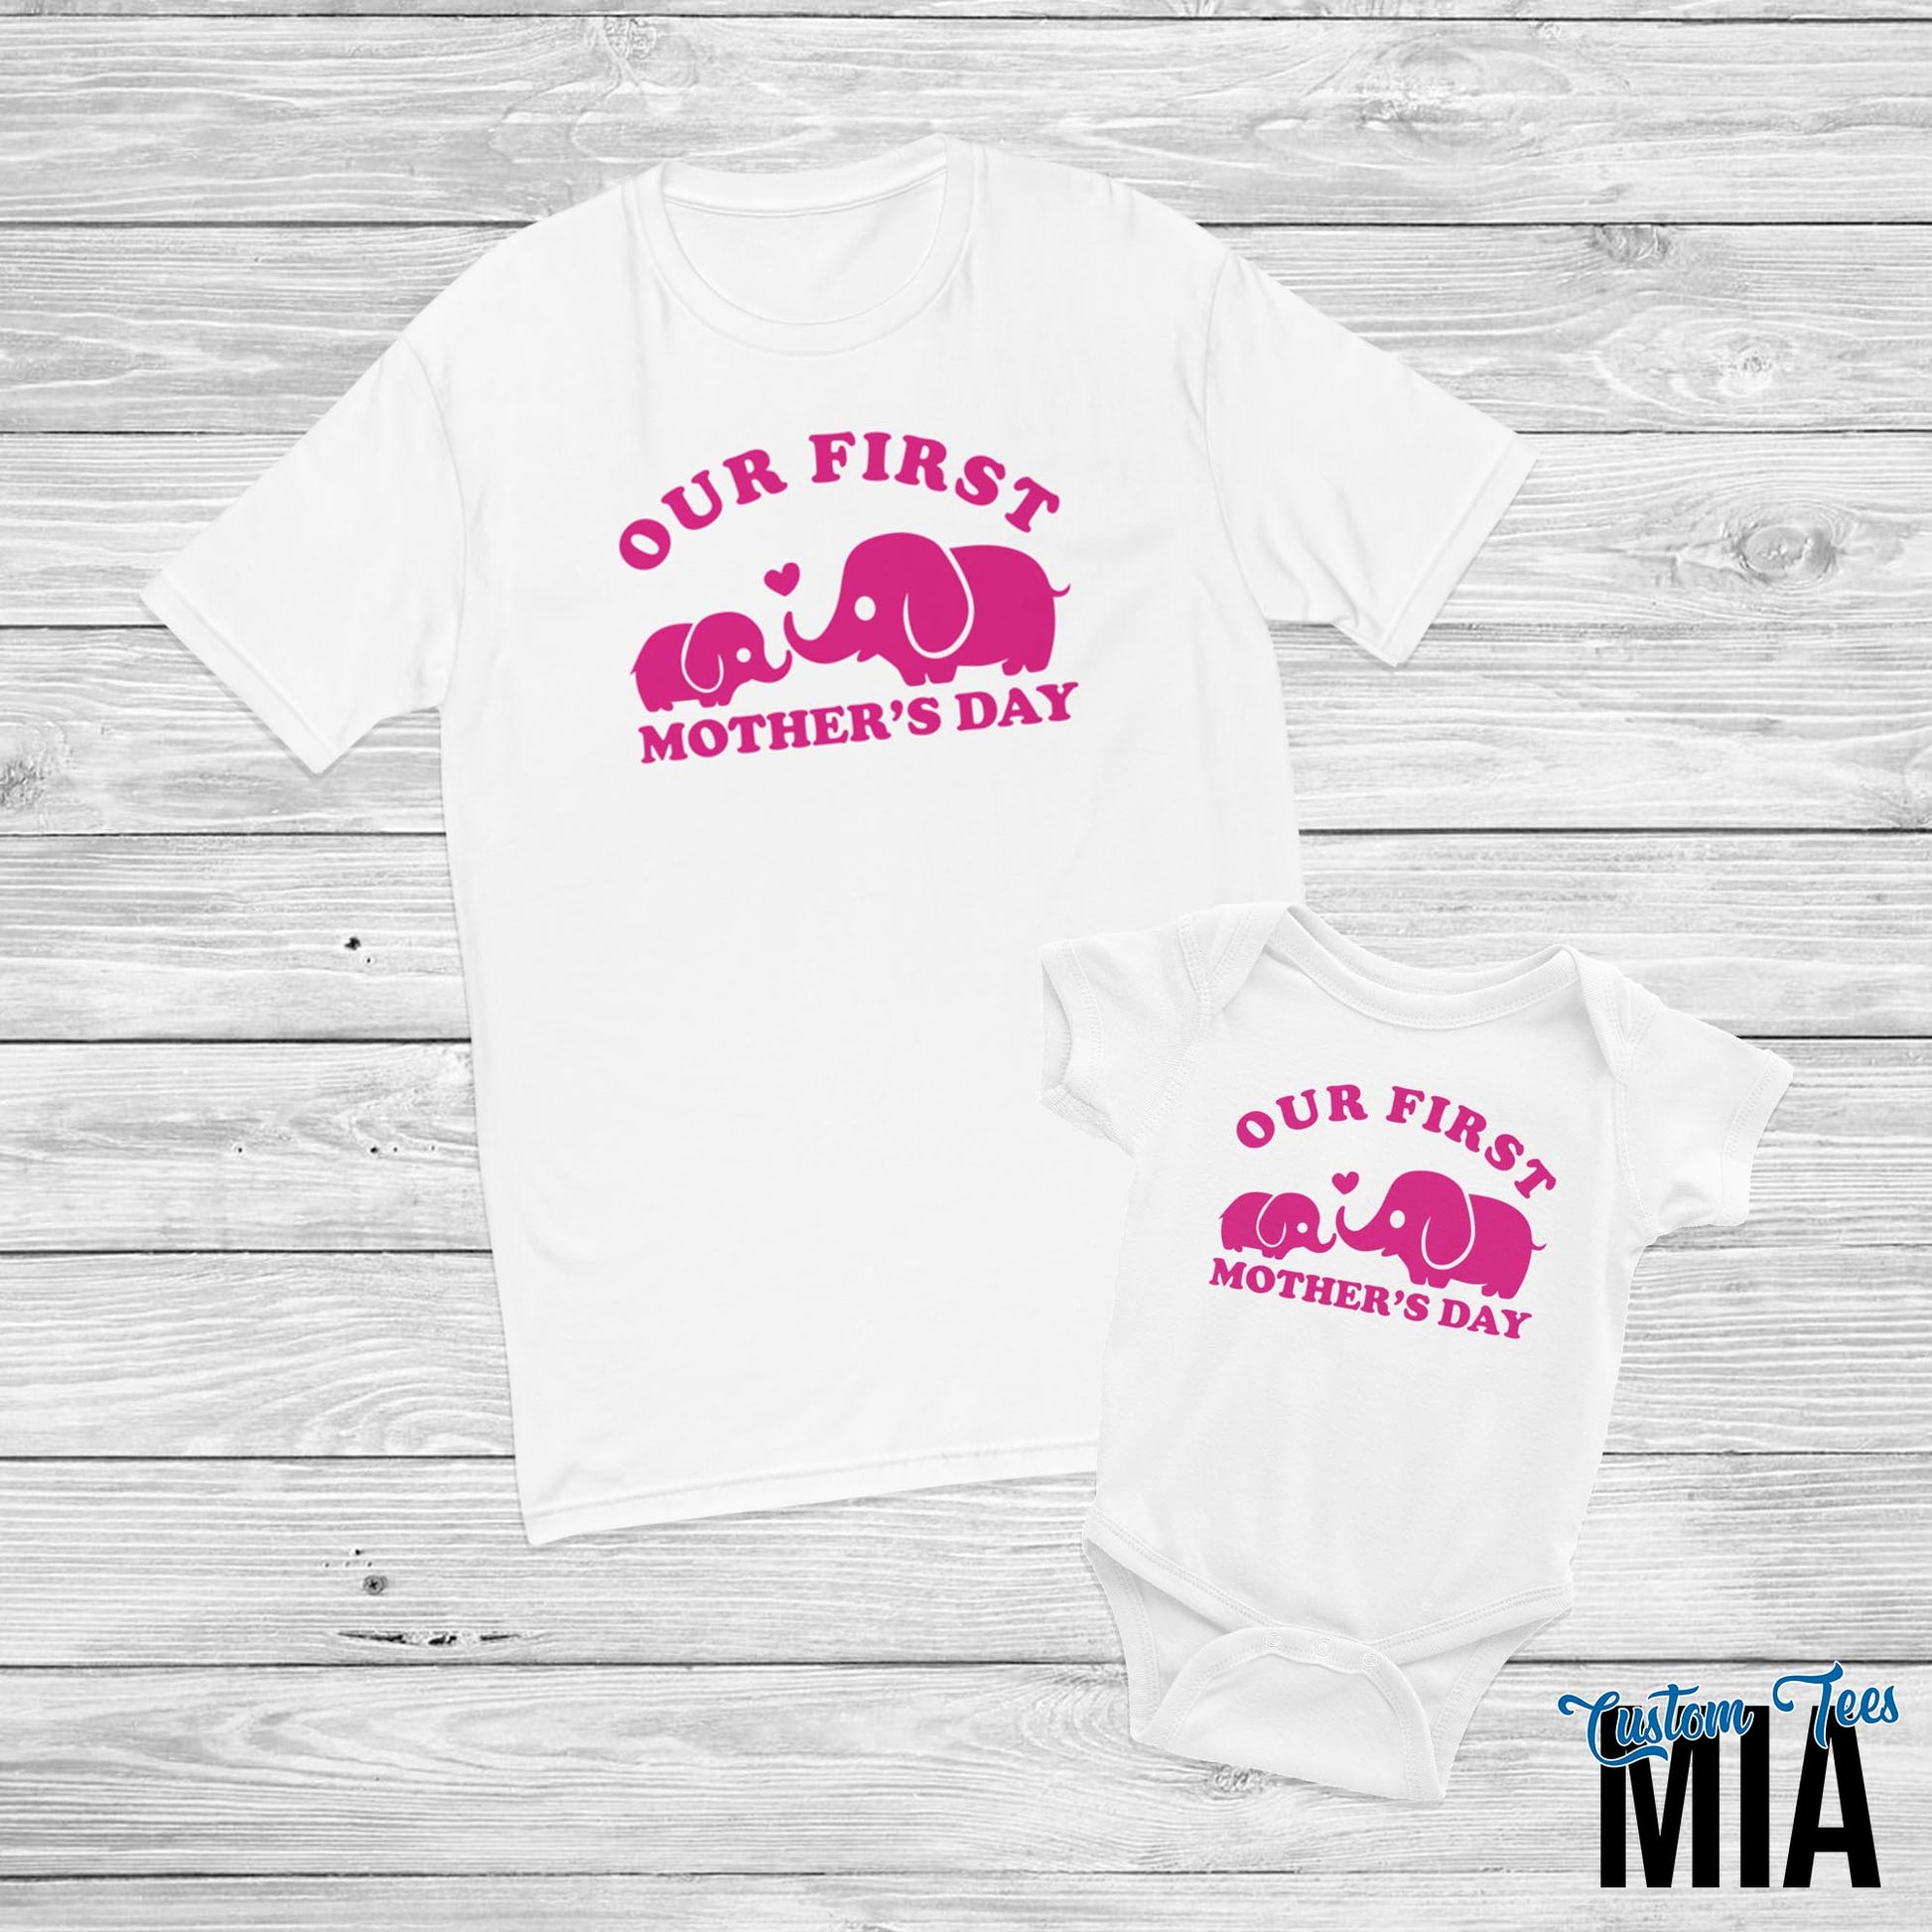 Our First Mother's Day Shirt - Custom Tees MIA